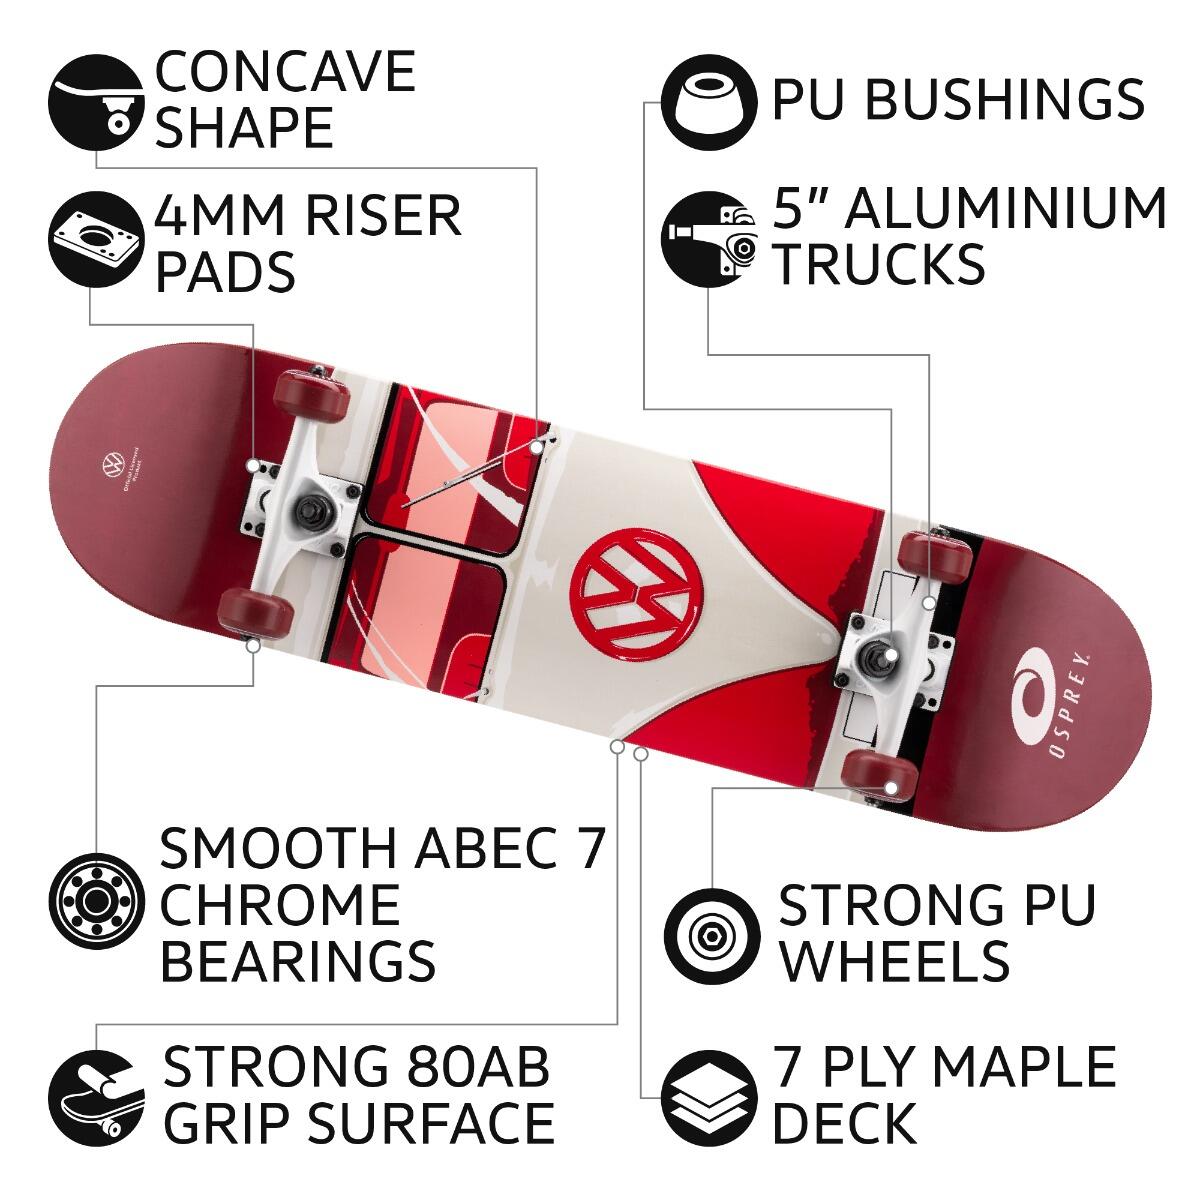 VW Complete Double Kick Skateboard, Maple Concave Deck 1 and Only 3/4